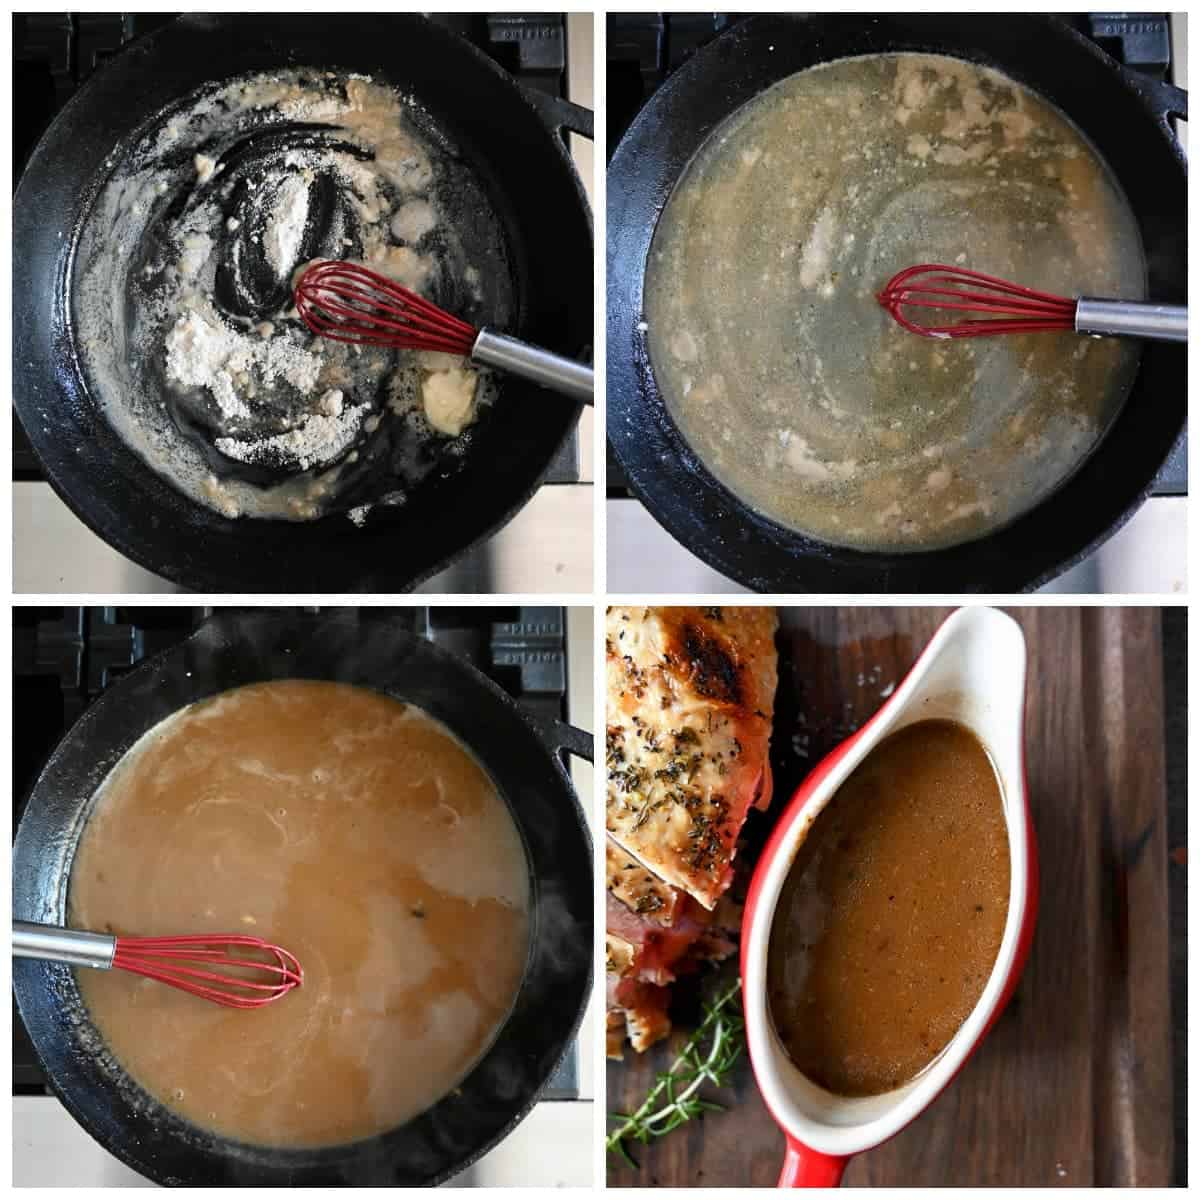 Four process photos. First one, butter in flour in a cast iron skillet. Second one, slow cooker juices poured into the skillet. Third one, gravy coming to a simmer with a red whisk. Gravy finished and placed into a red gravy boat.